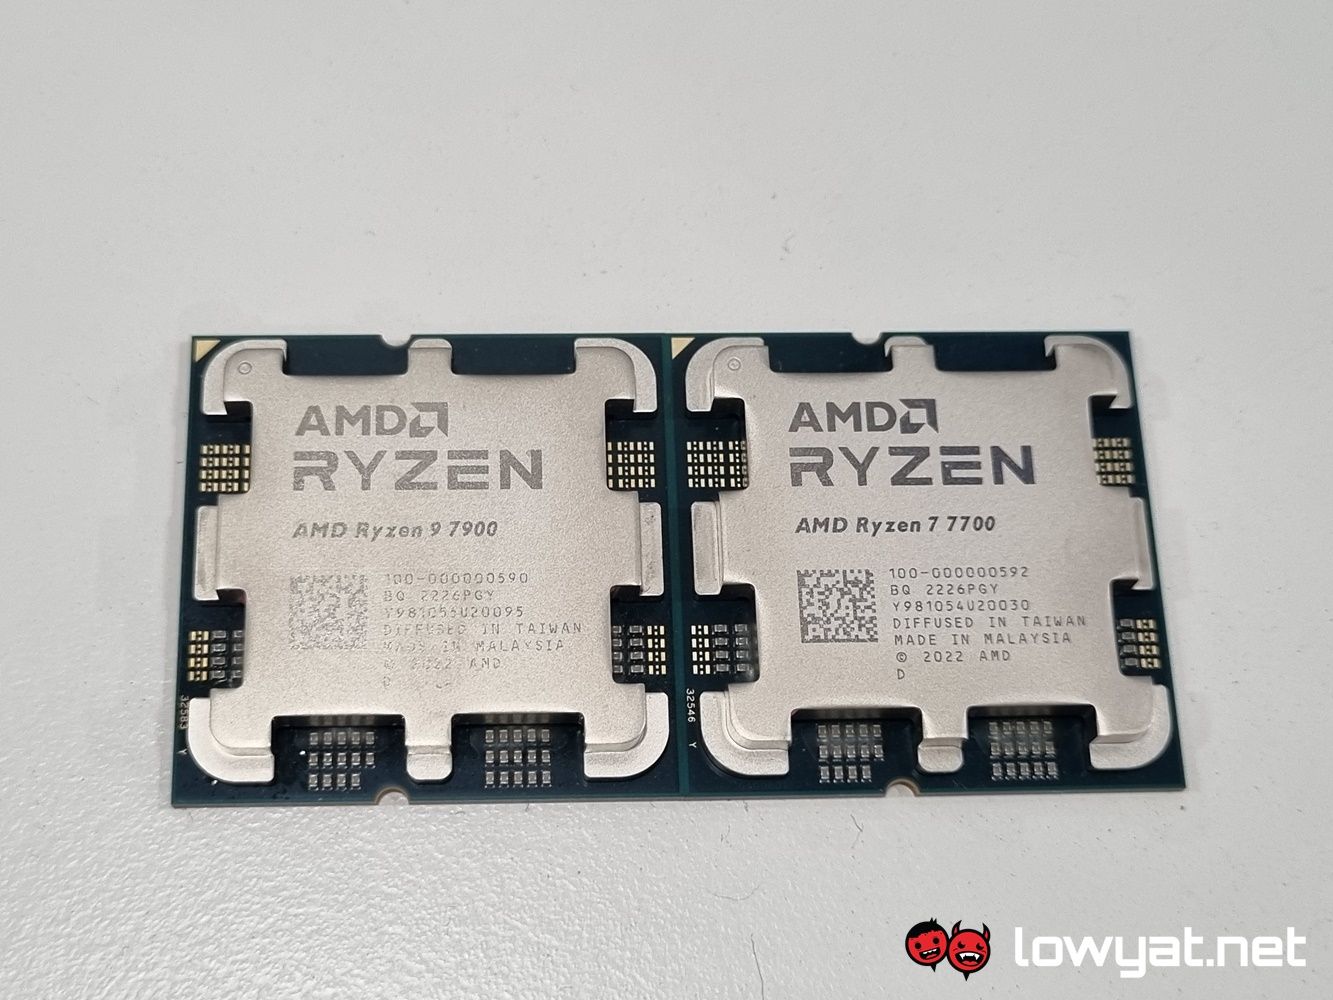 AMD Ryzen 9 7900 and Ryzen 7 7700 review: High on performance, low